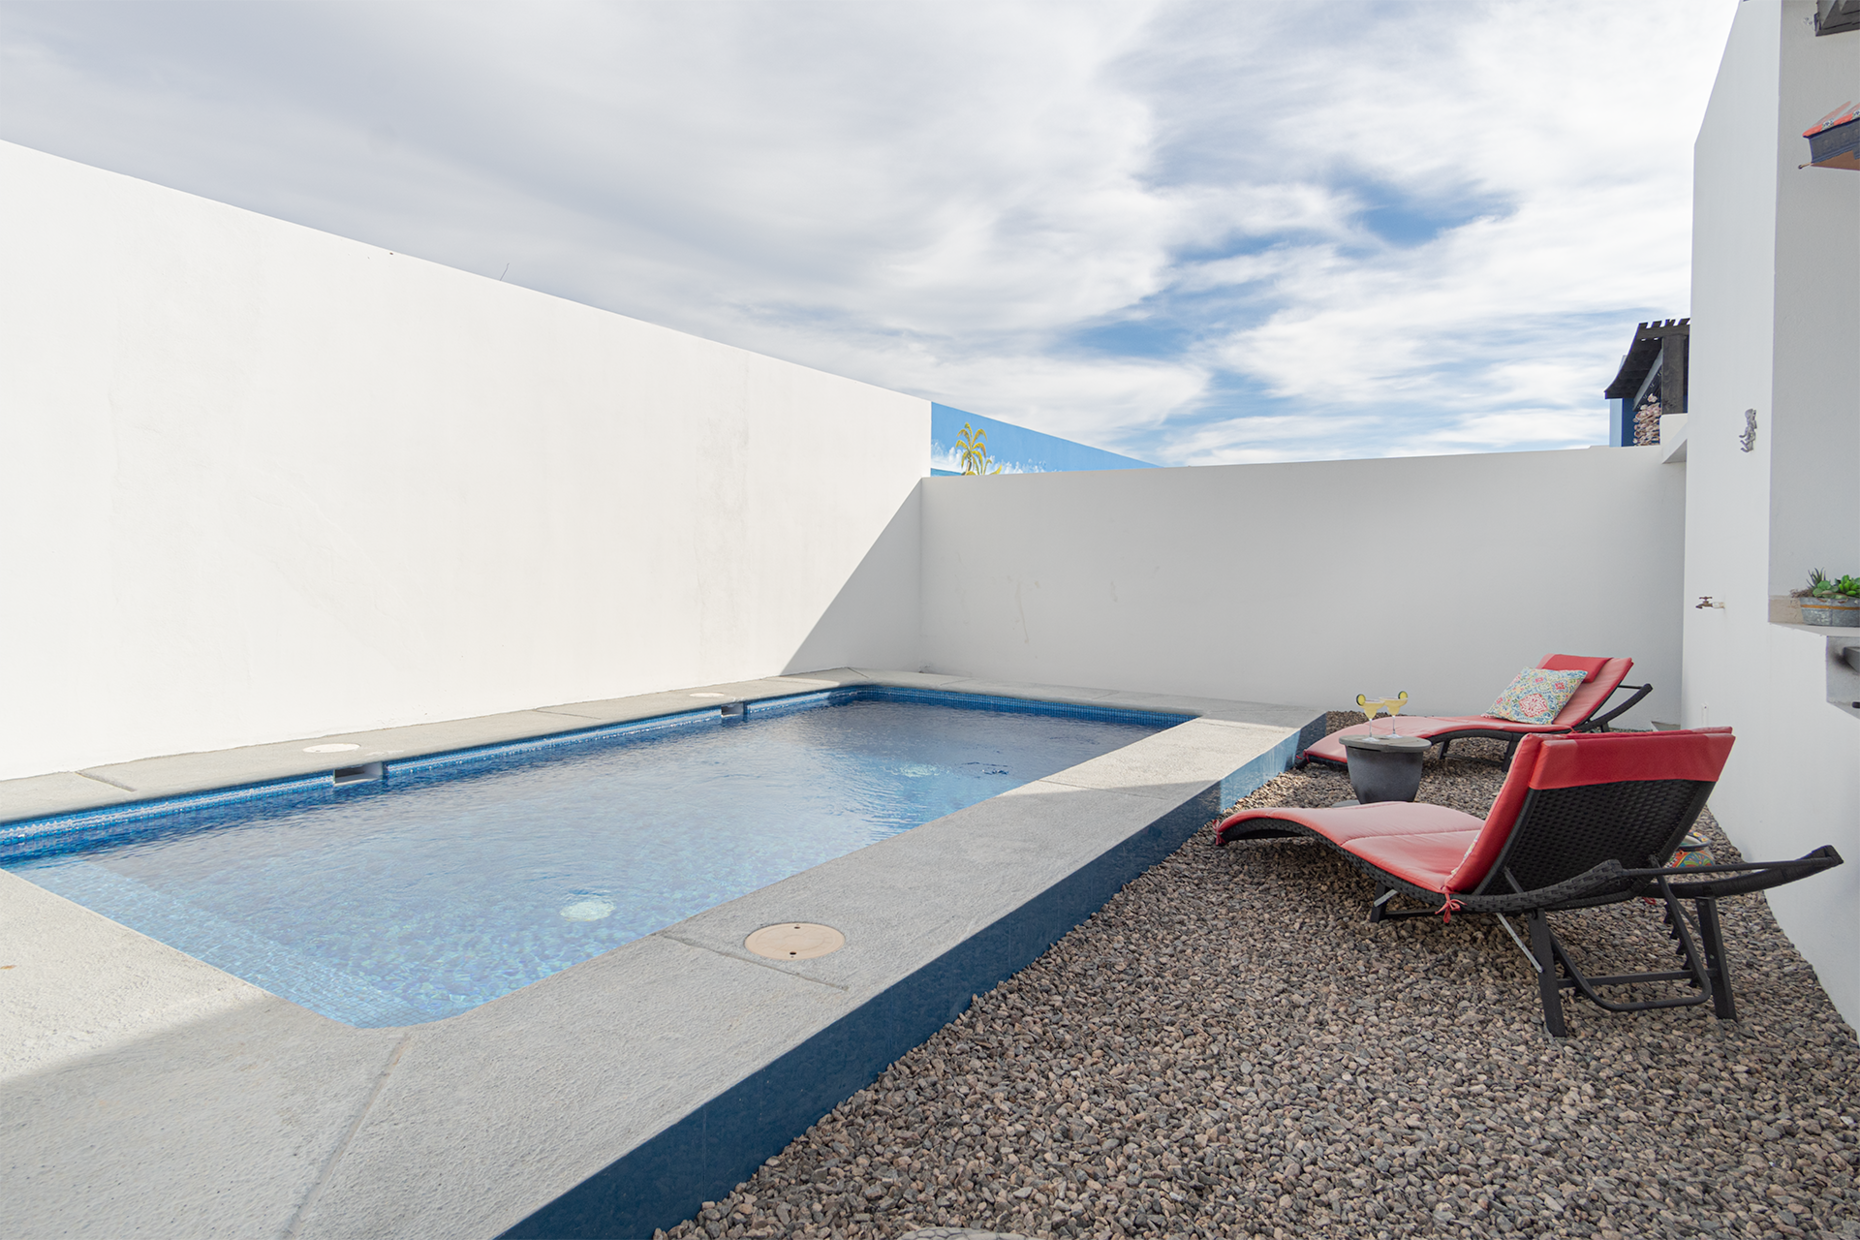 the pool and chaise lounges